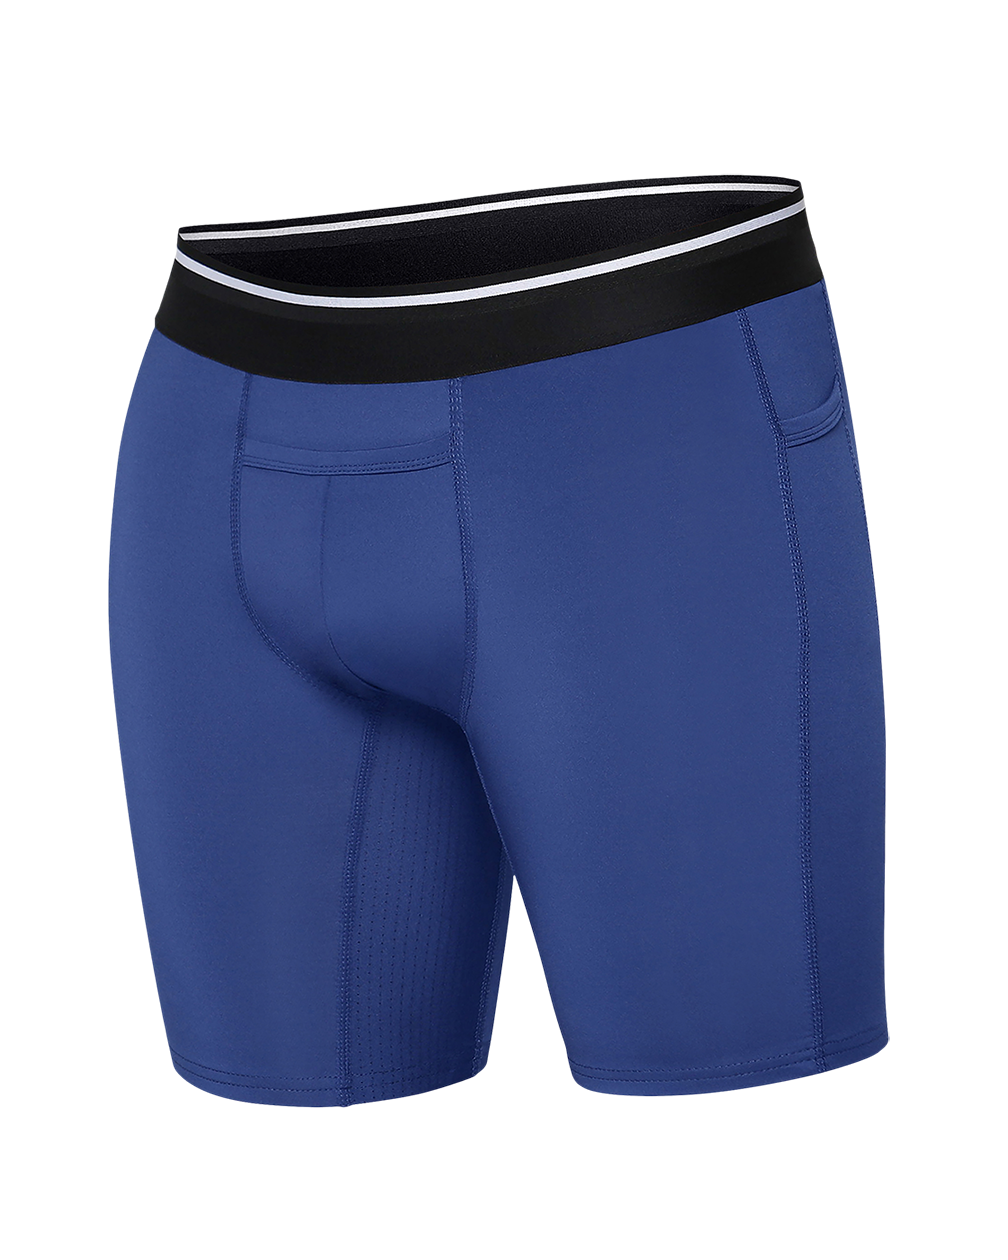 Compression Citizens Athletic Men– Baselayer|All Shorts for Endurance